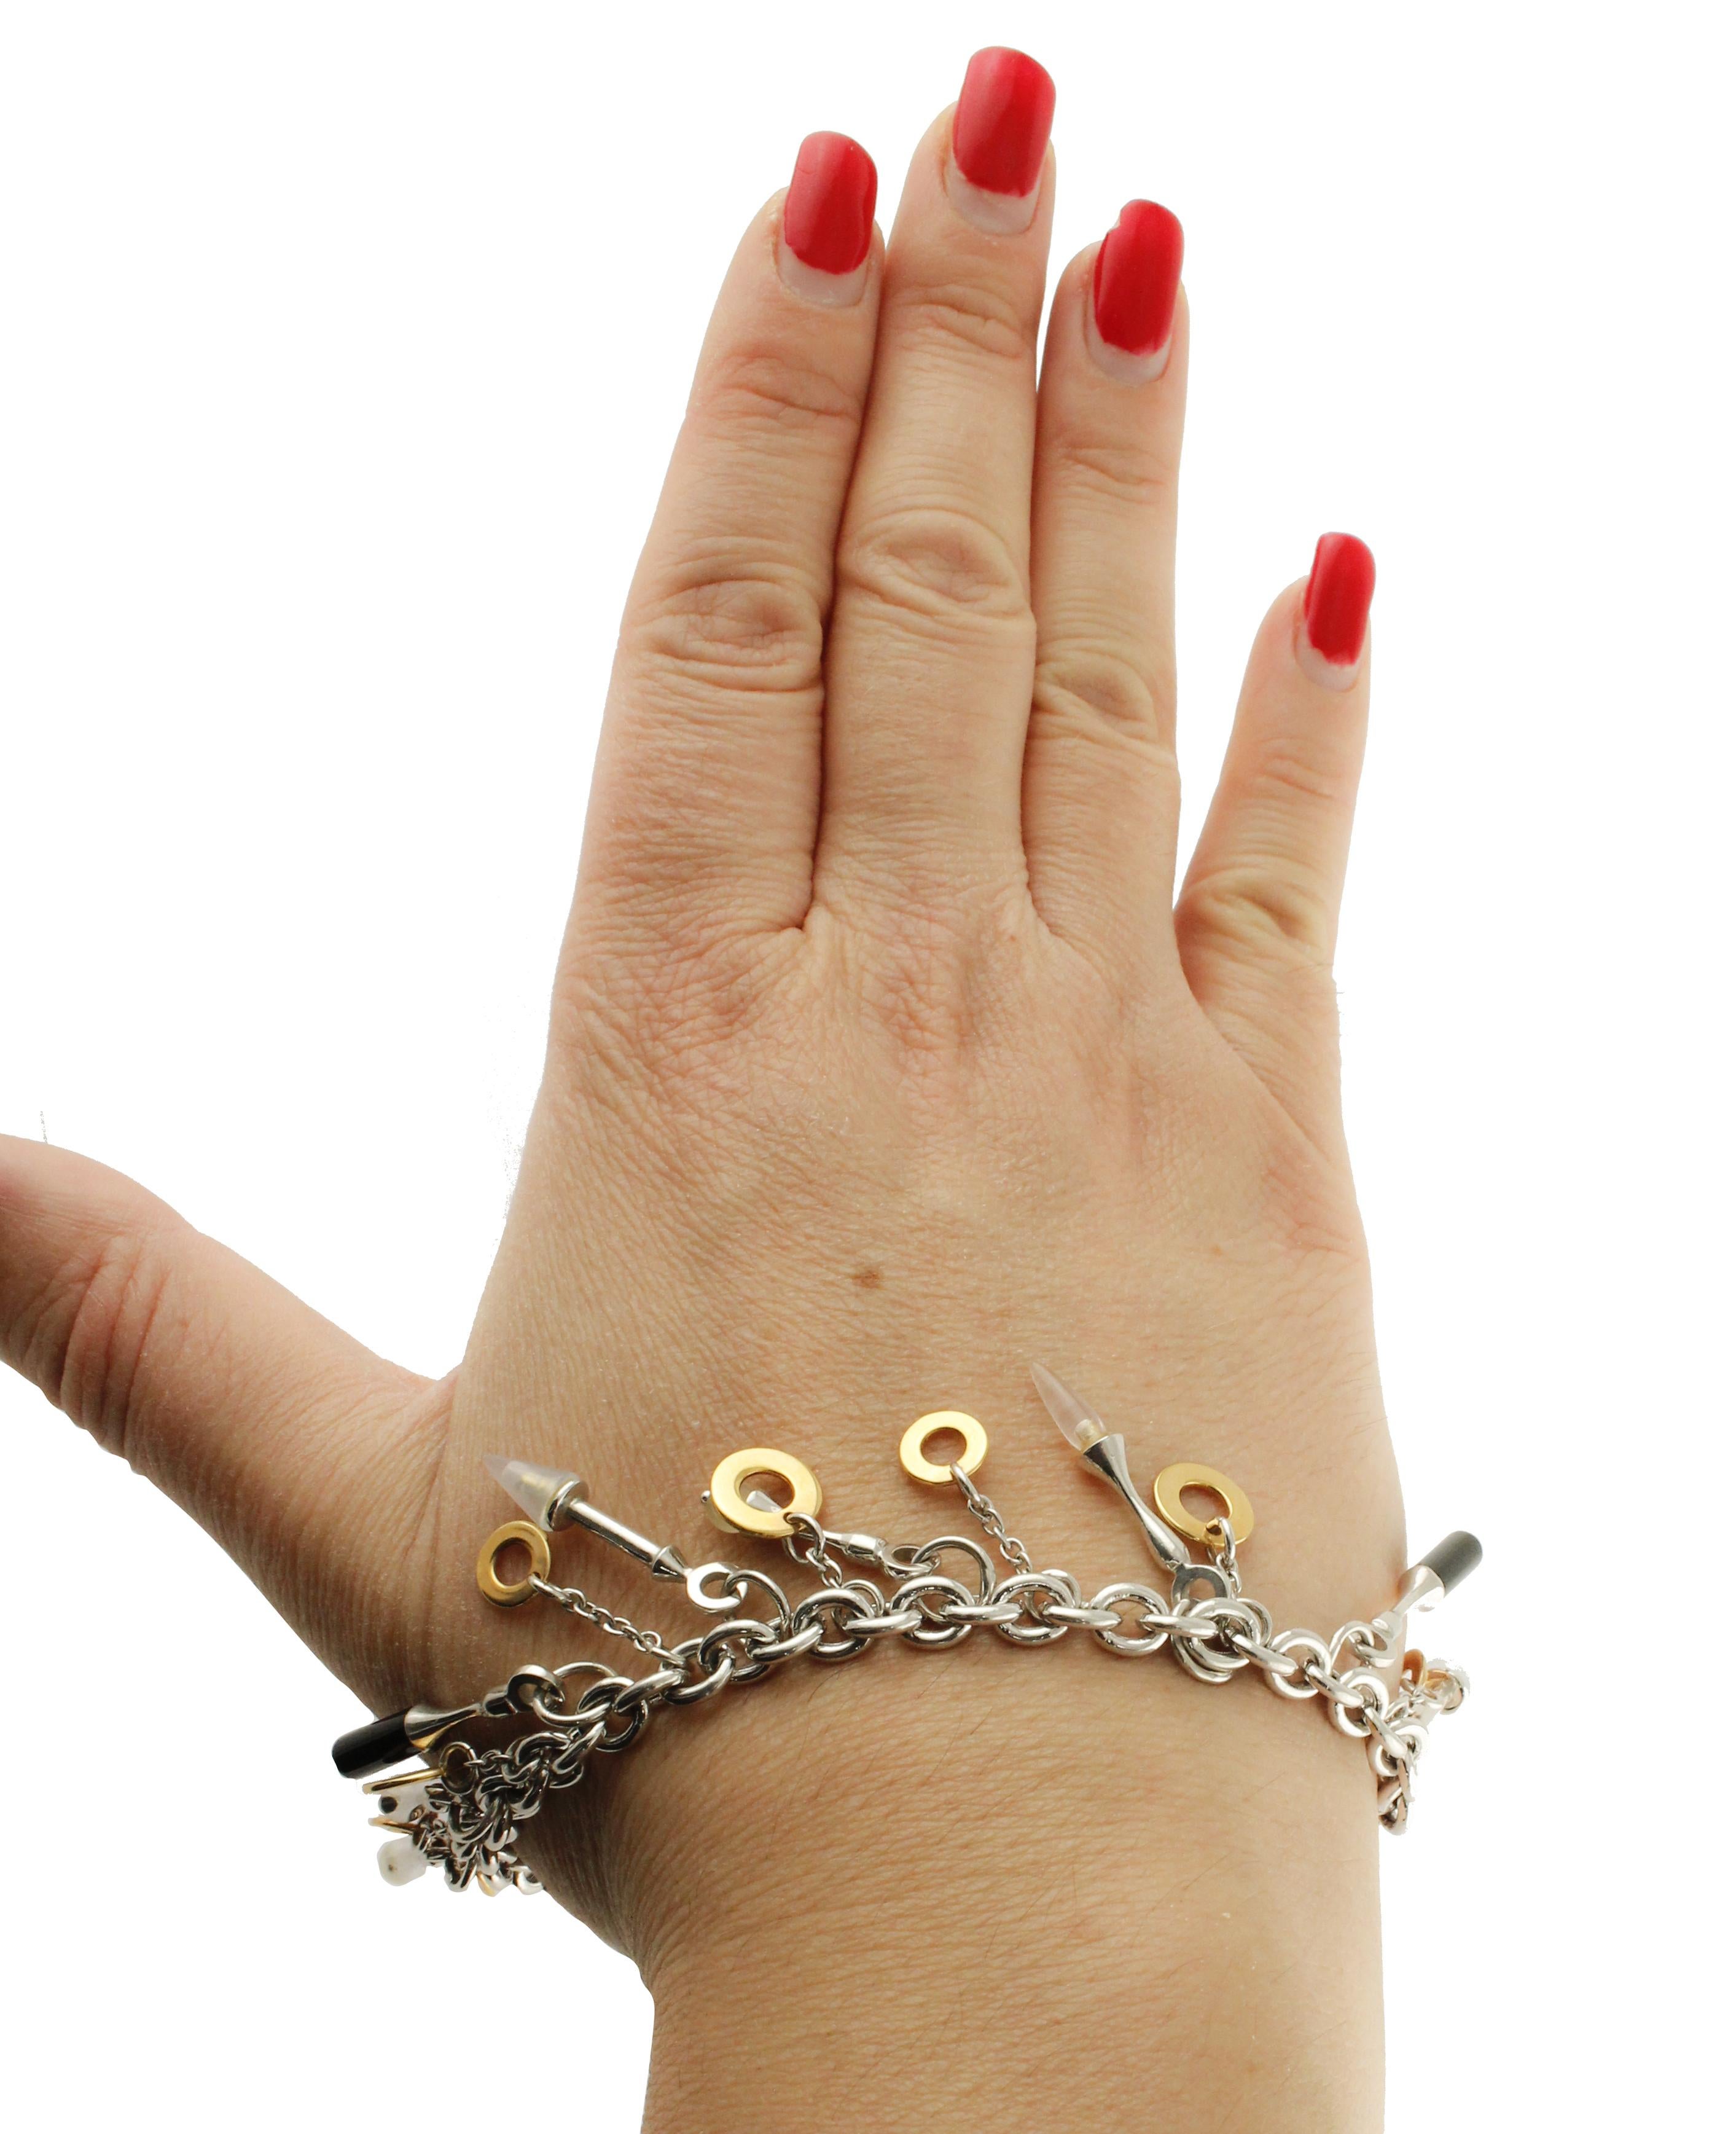 Stones, Weißgold-Charme-Armband im Zustand „Gut“ im Angebot in Marcianise, Marcianise (CE)